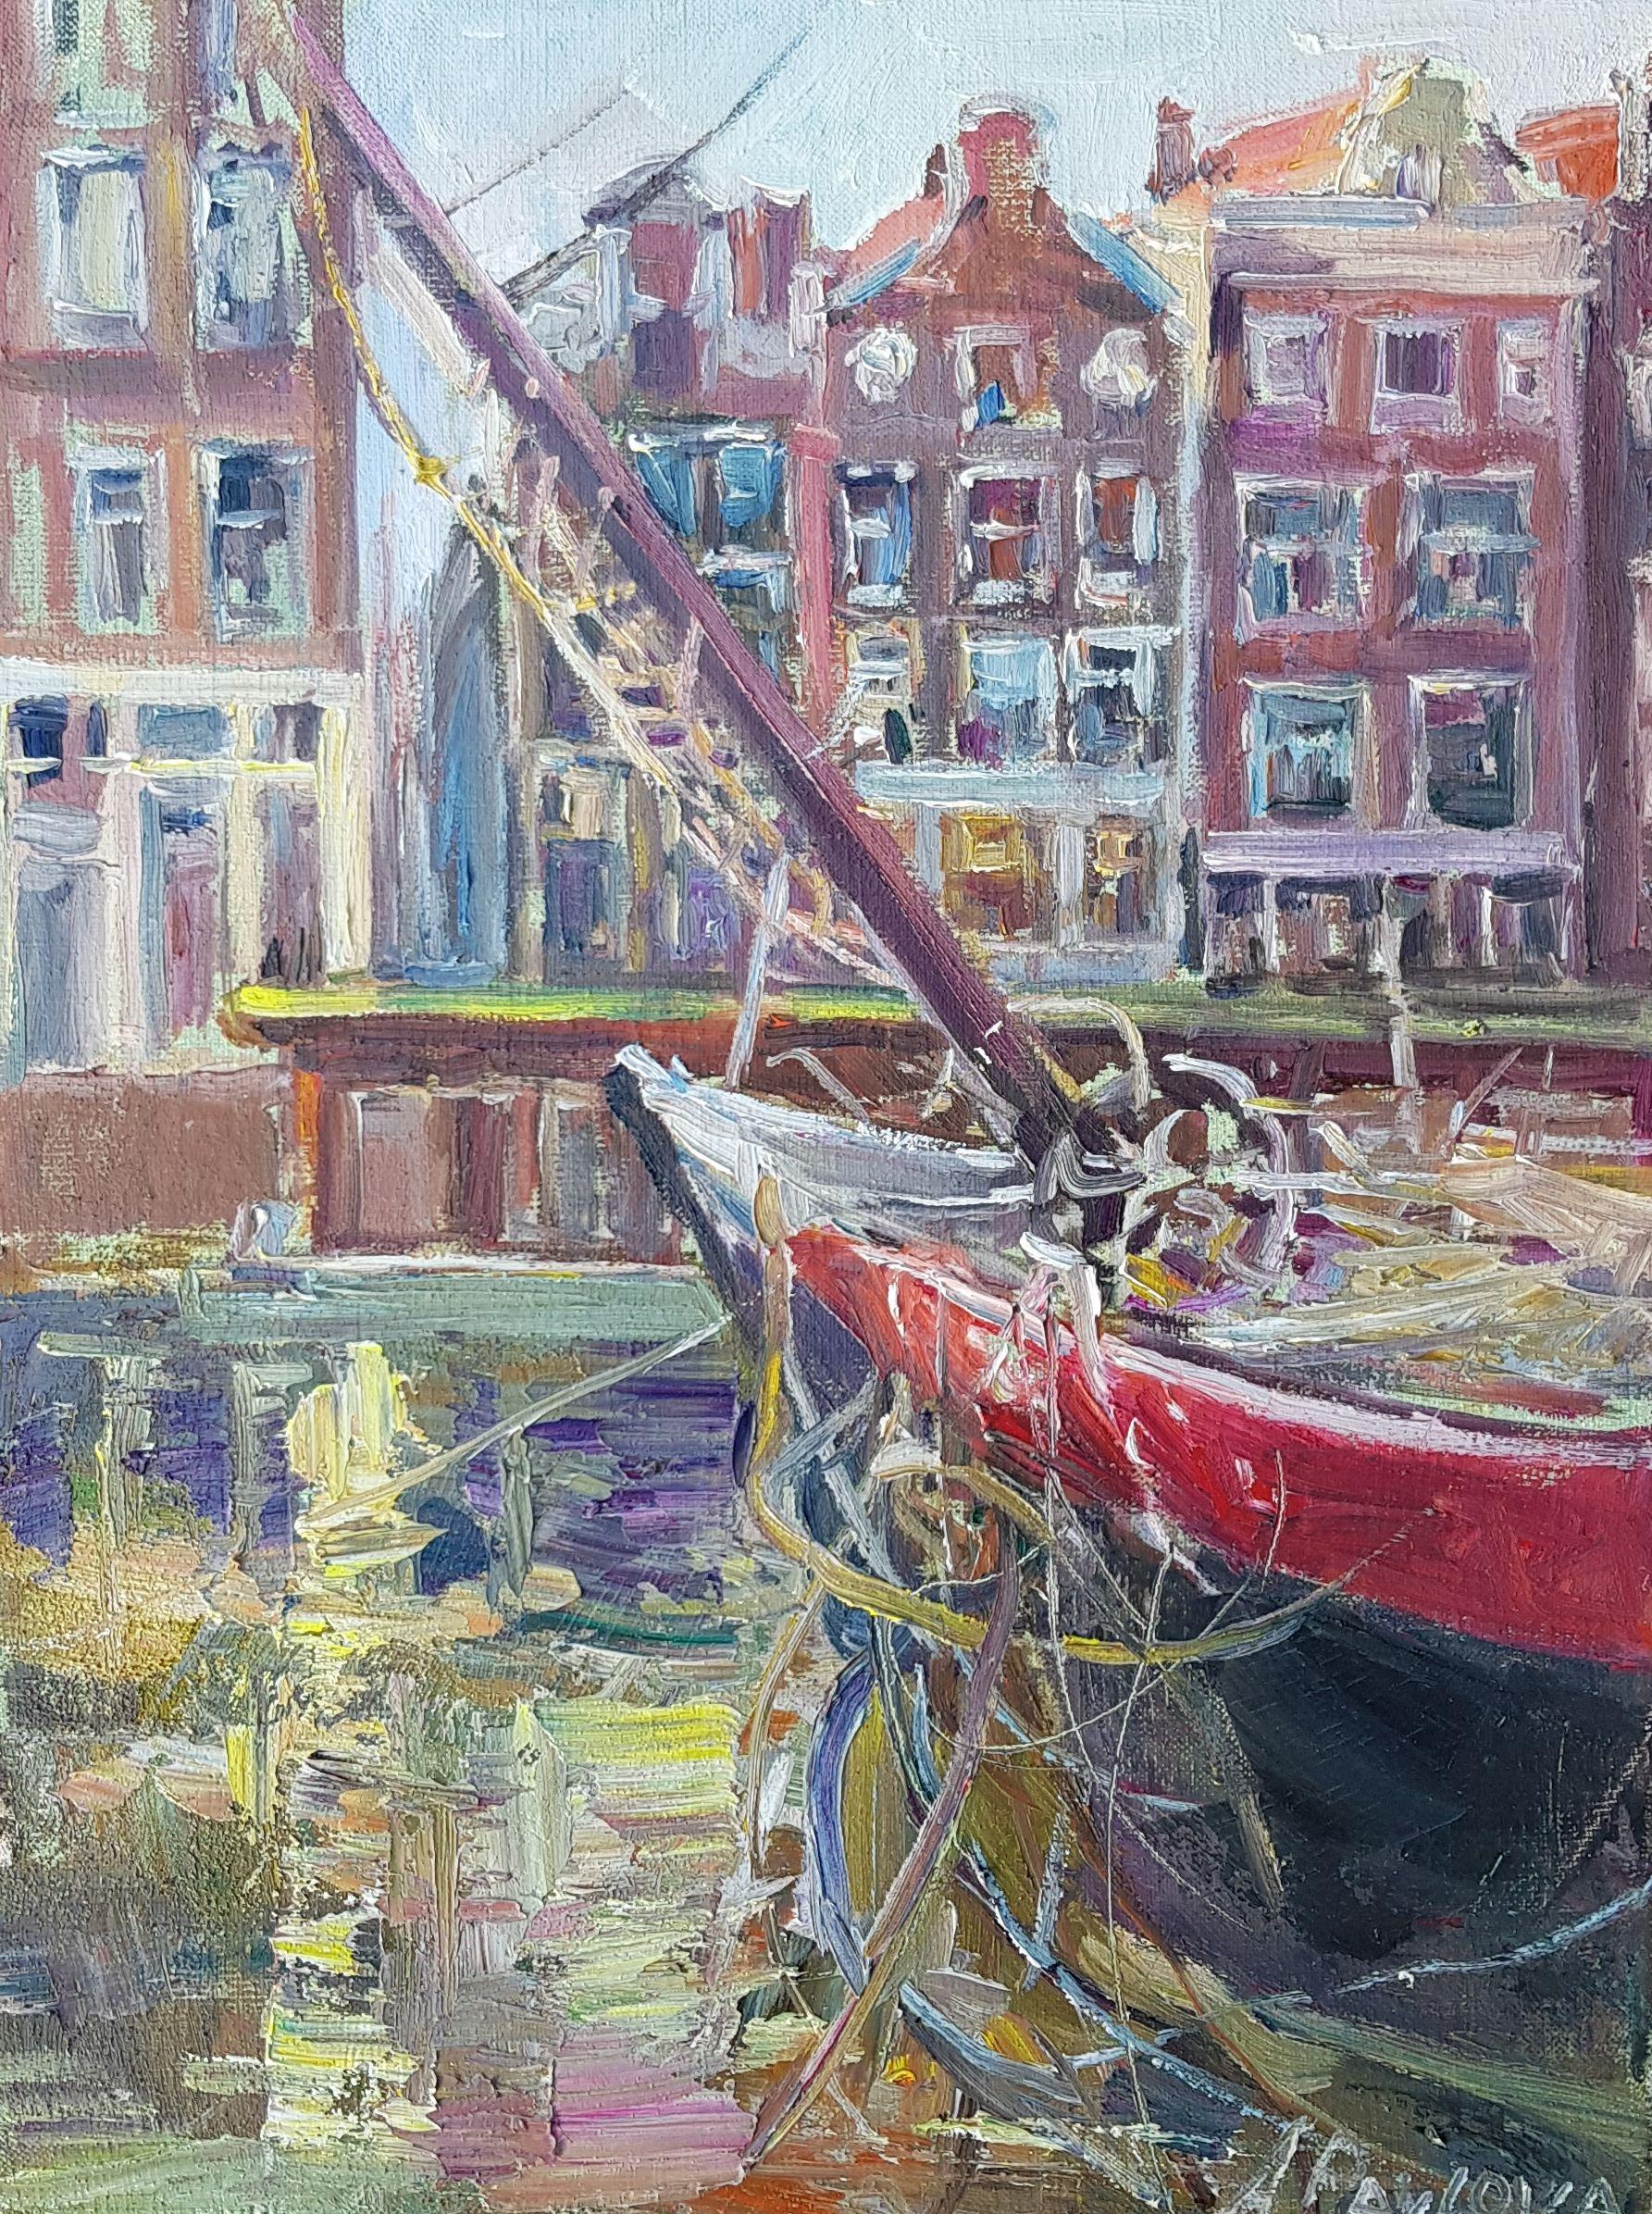 Was nice to see an old boats in Amsterdam.  A lot of people use to live here or rent it, quite interesting to see it in the ey making always special character  of Amsterdam. :: Painting :: Impressionist :: This piece comes with an official